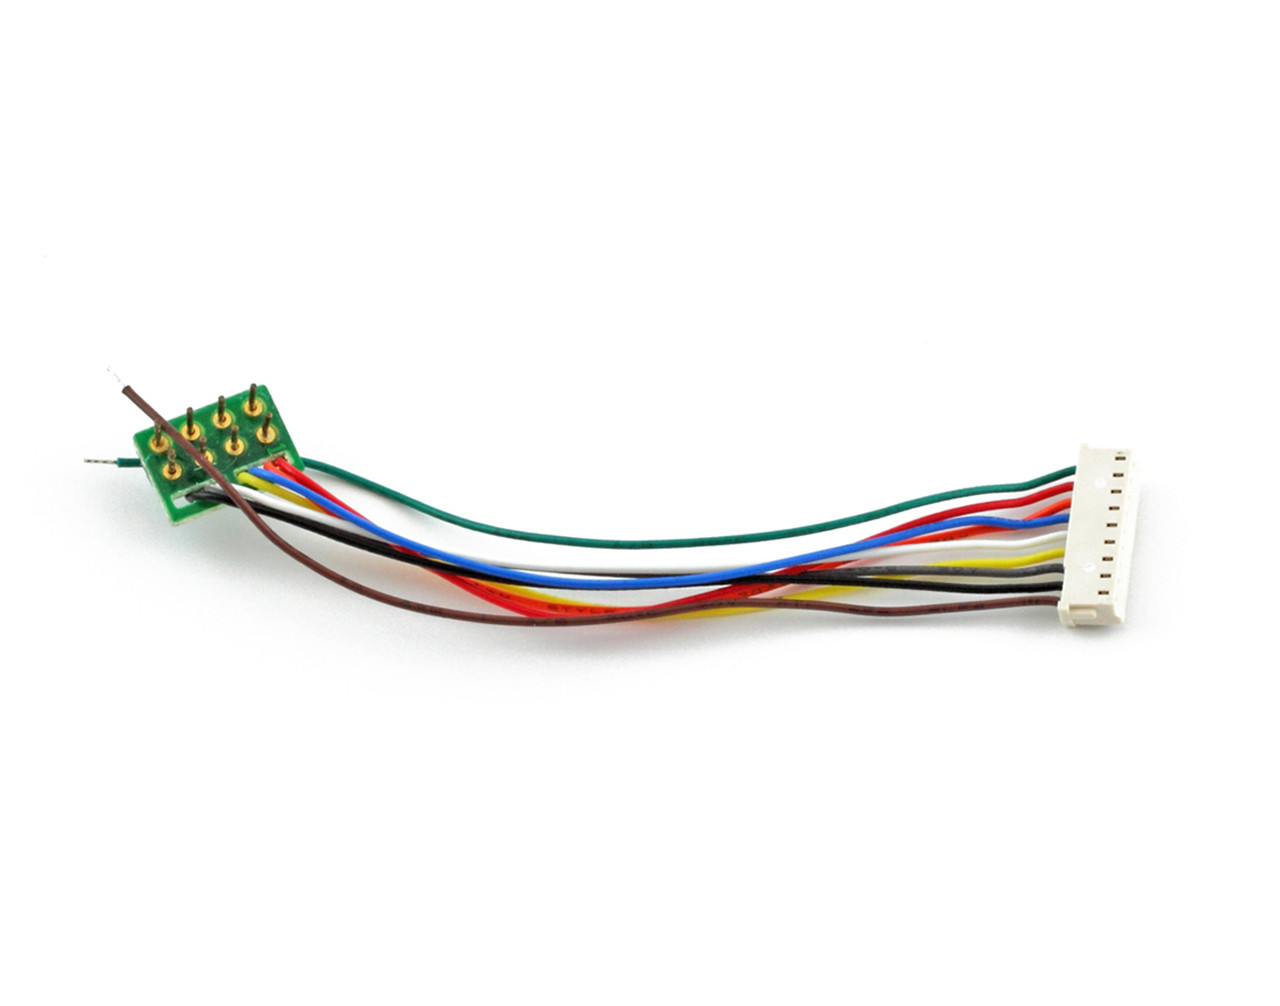 SoundTraxx 810135 - 9-Pin JST To NMRA 8-Pin Wiring Harness